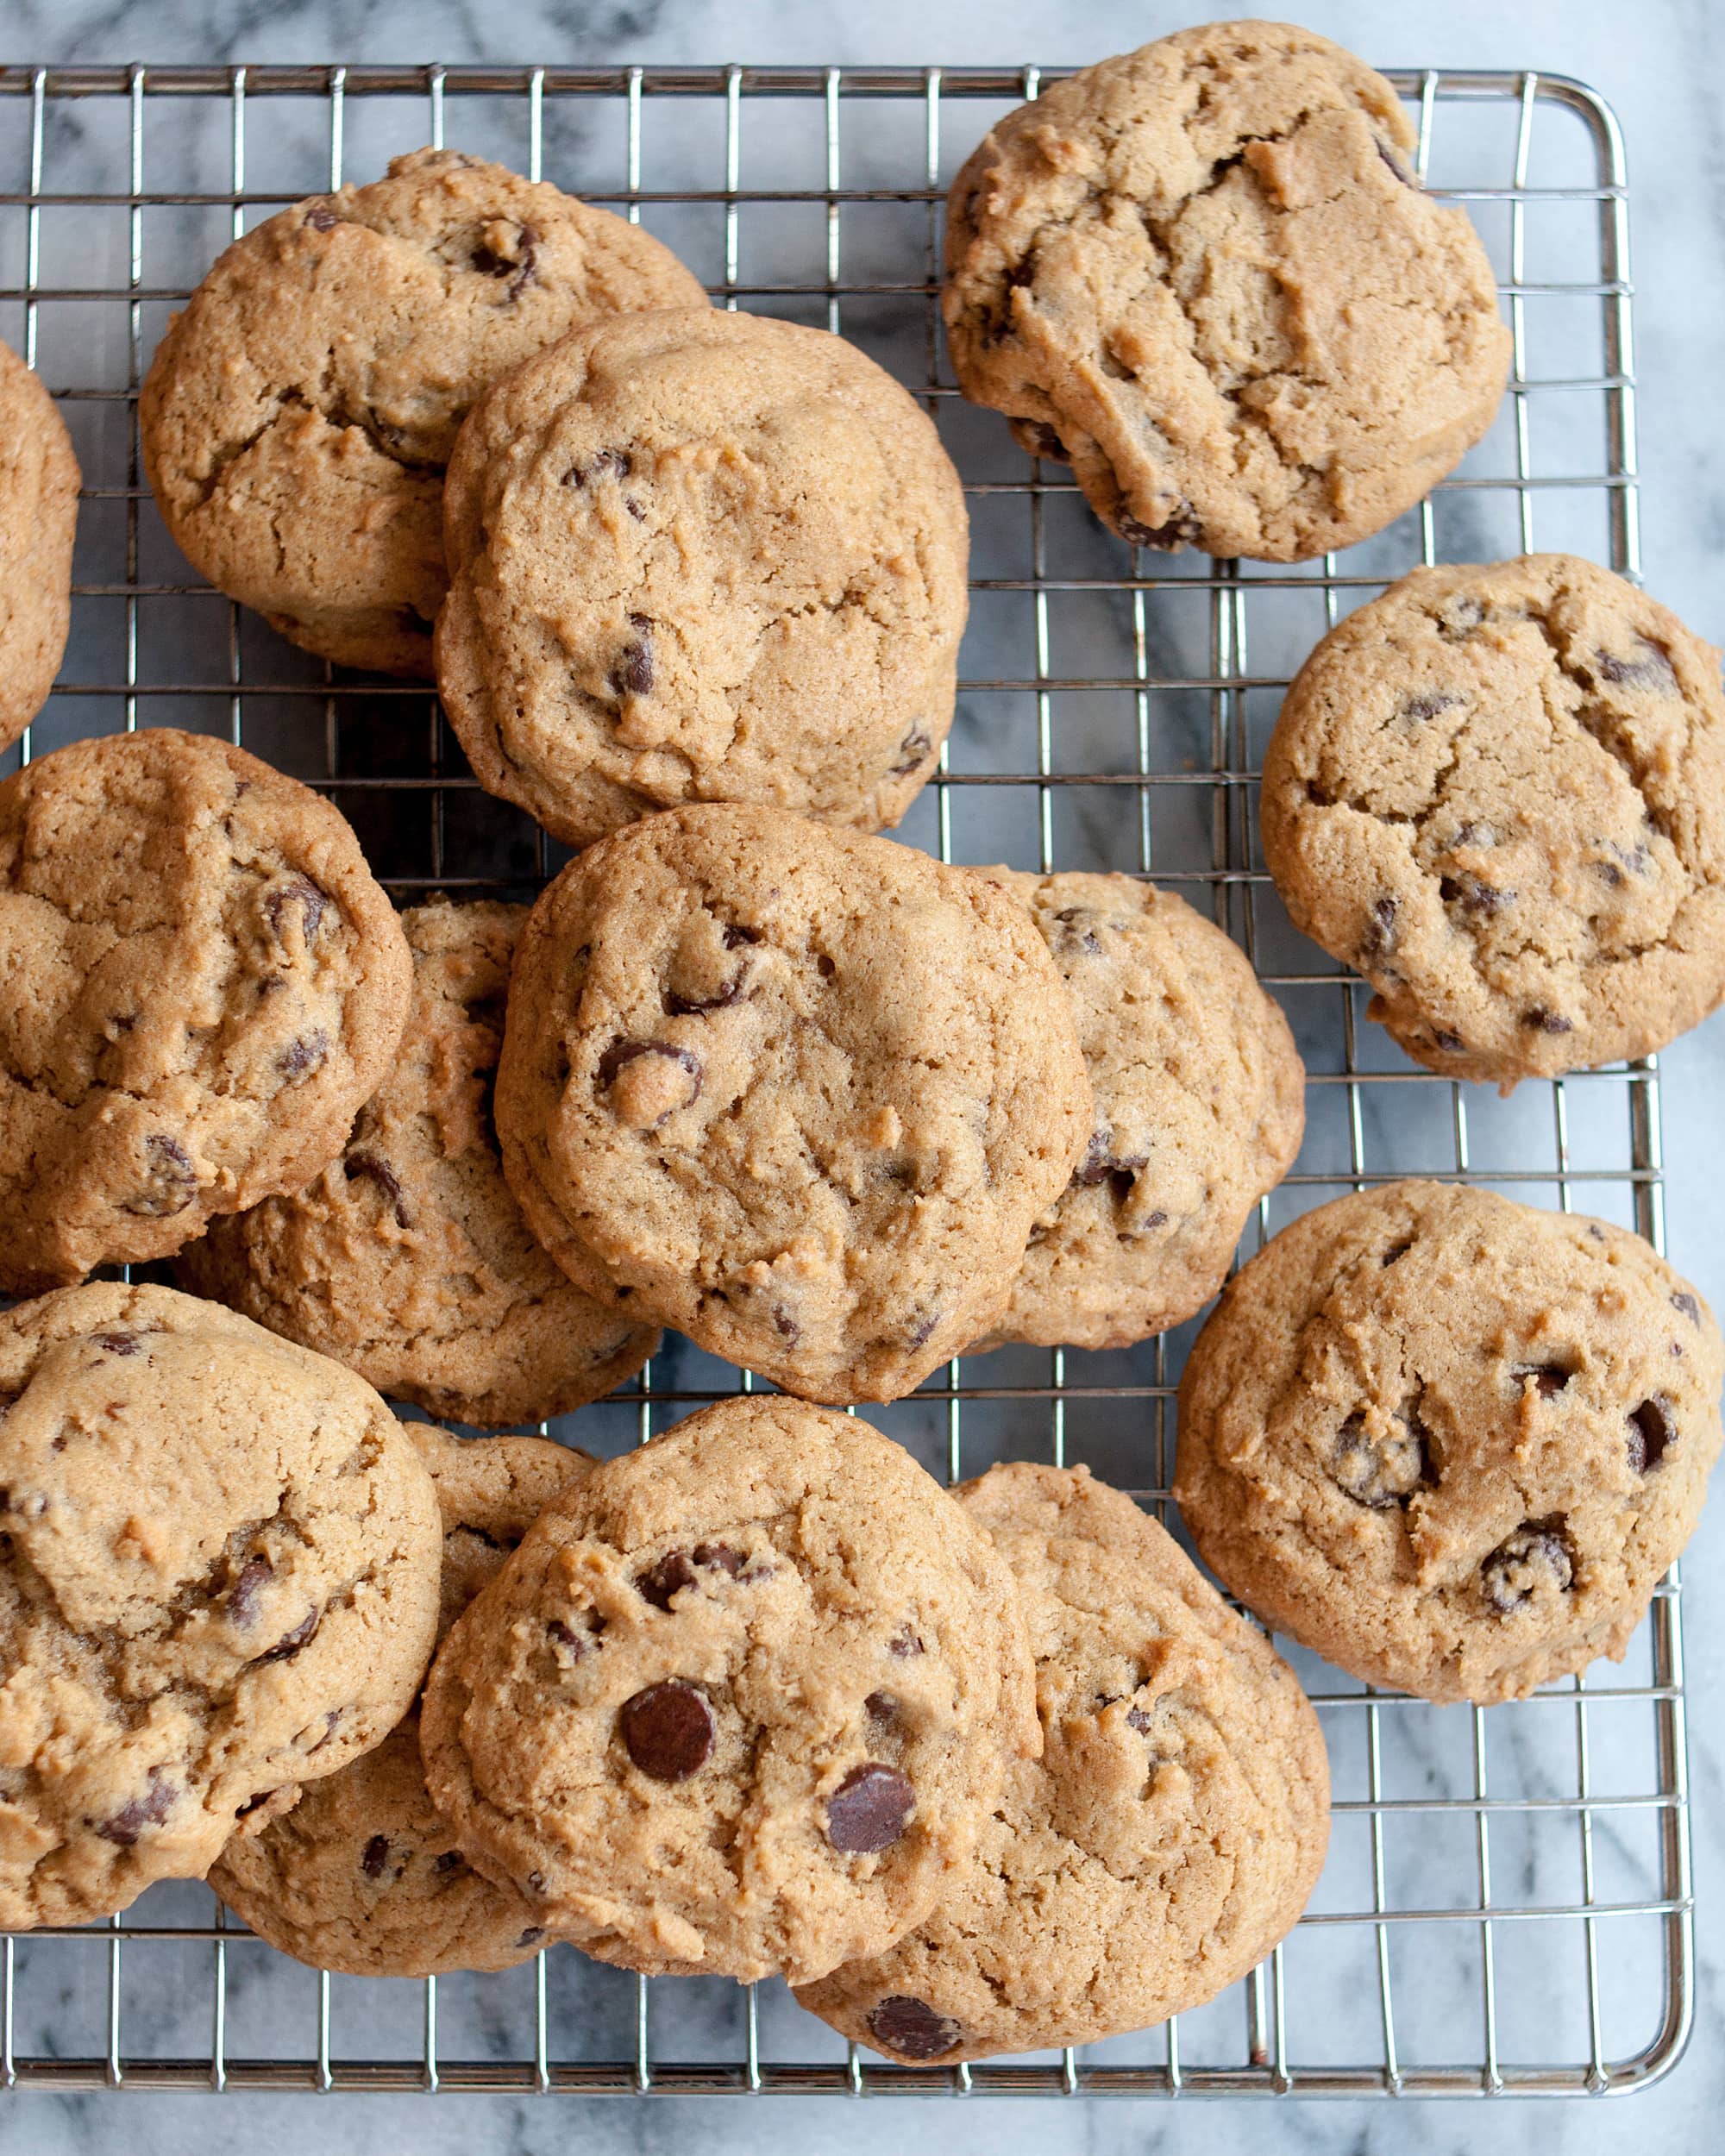 How To Make Chocolate Chip Cookies from Scratch | Kitchn